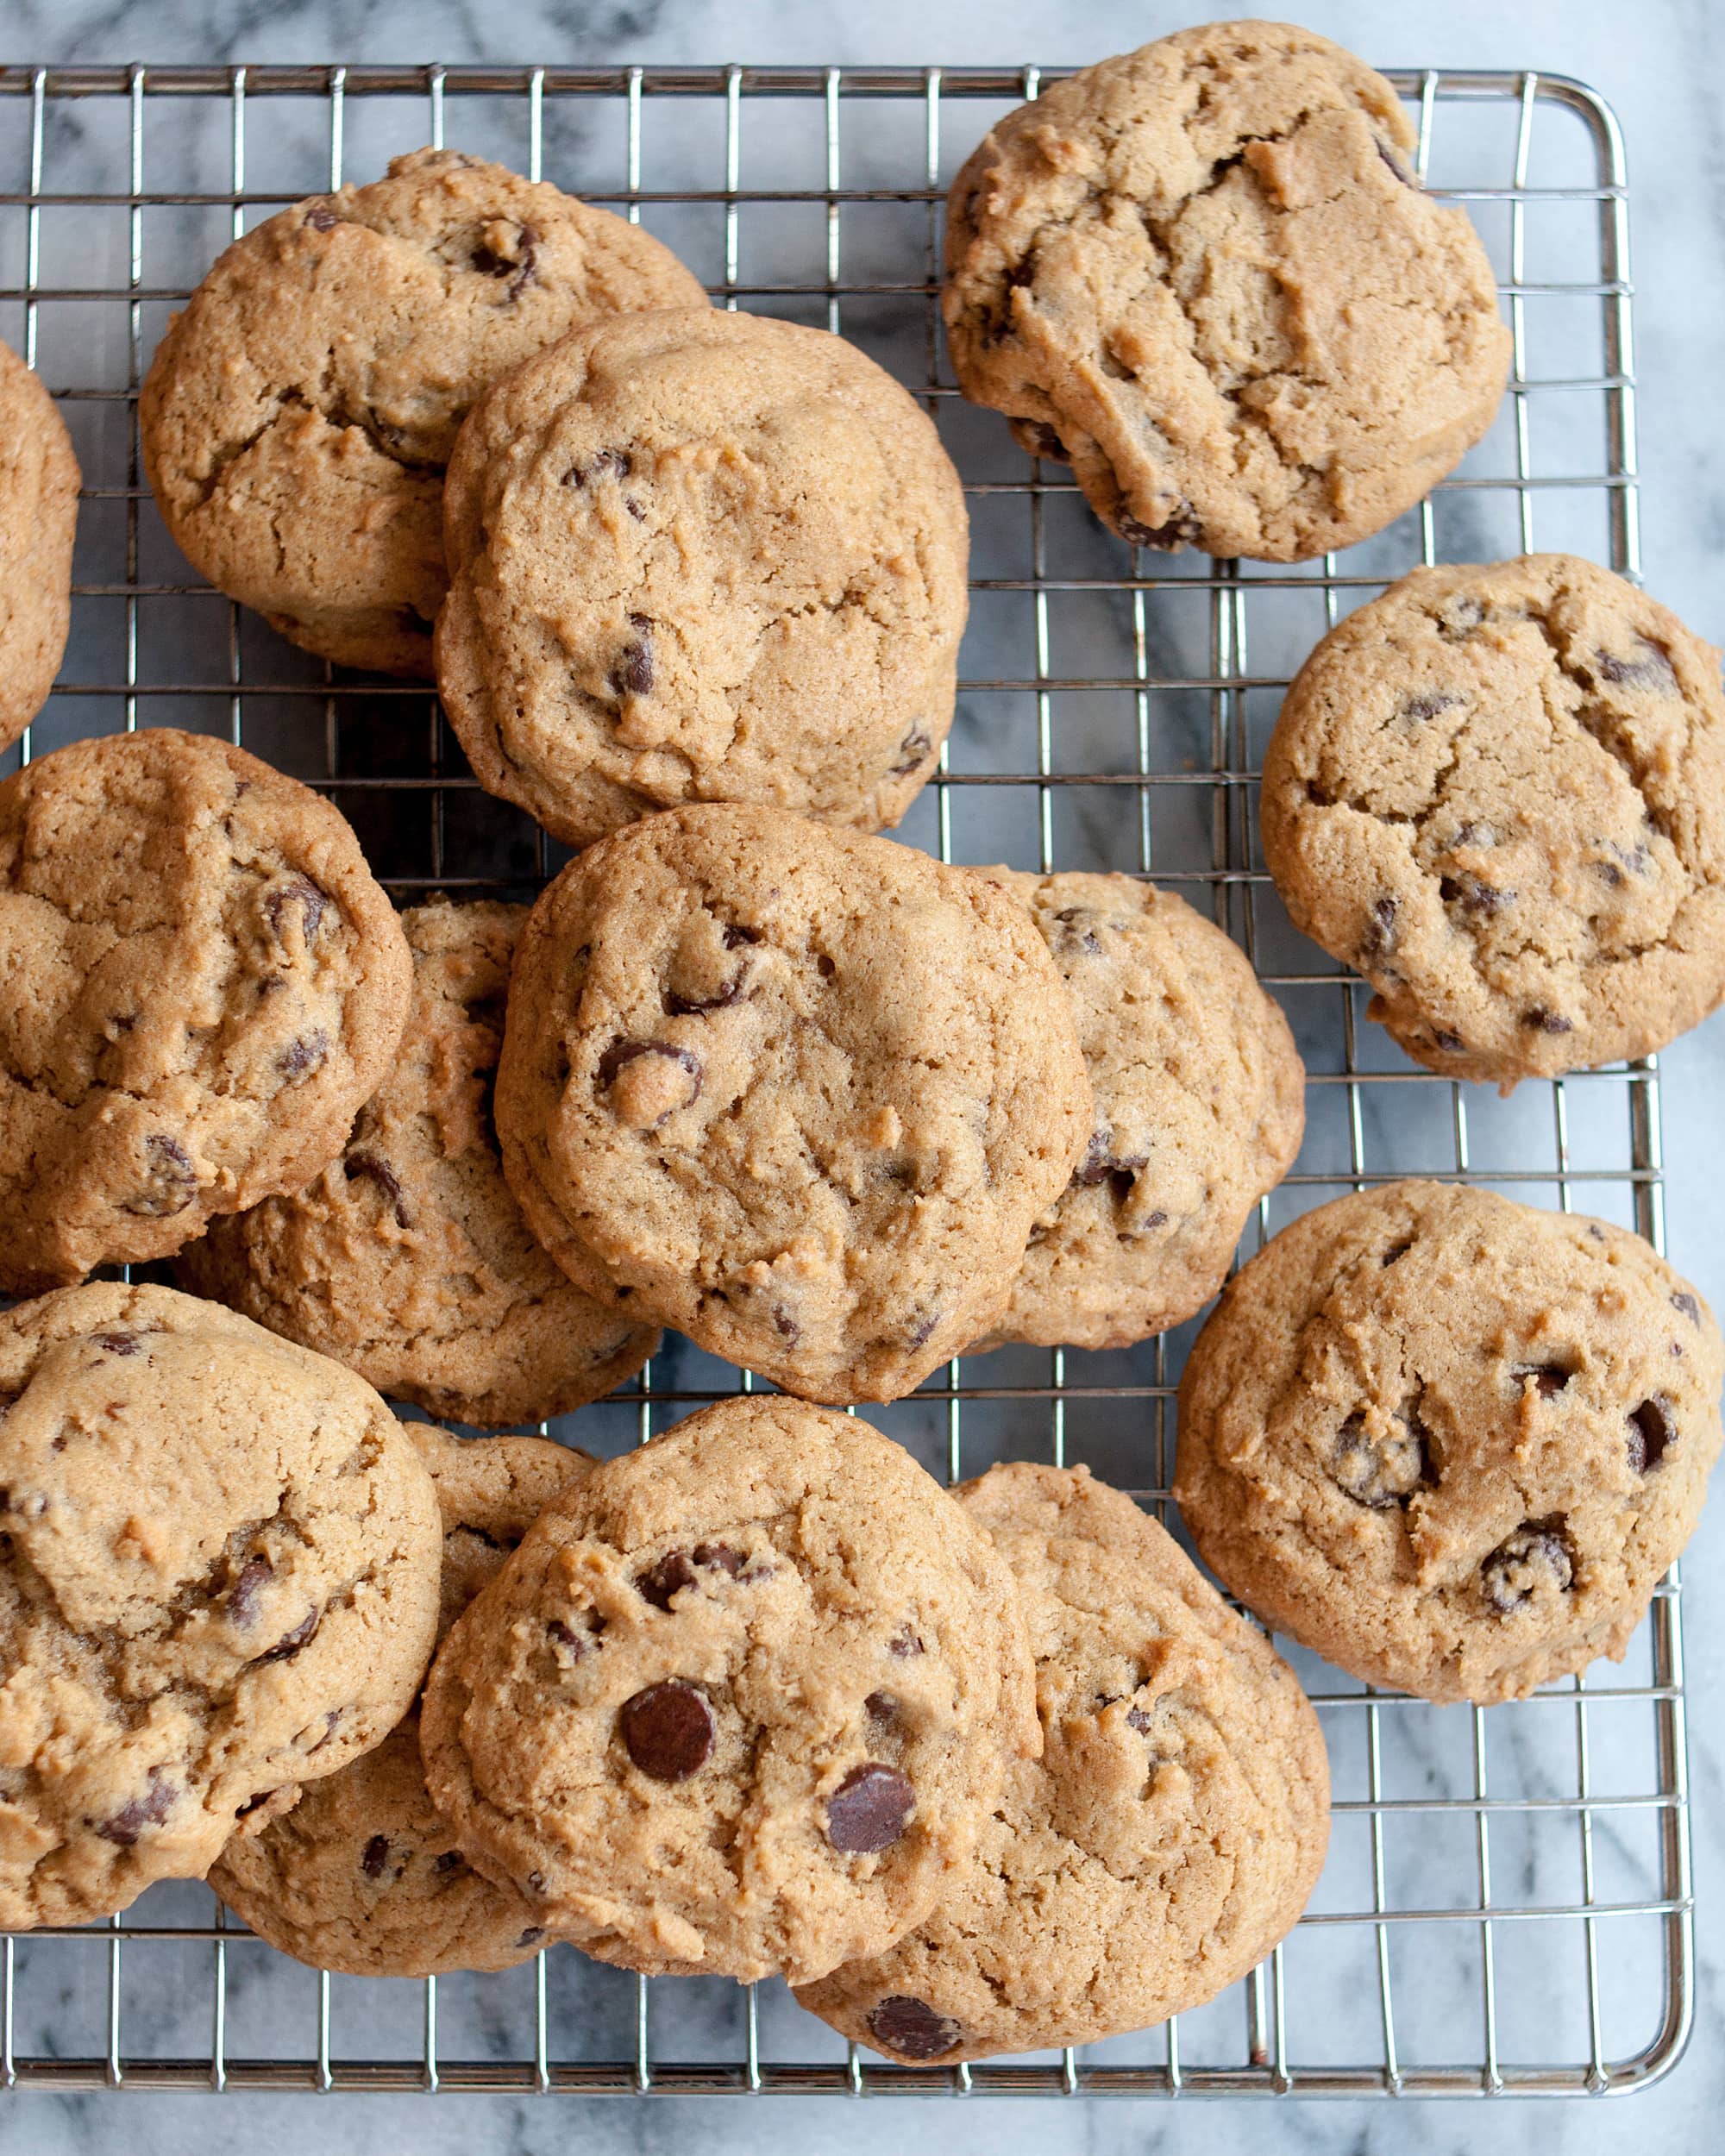 How To Make Chocolate Chip Cookies from Scratch | Kitchn